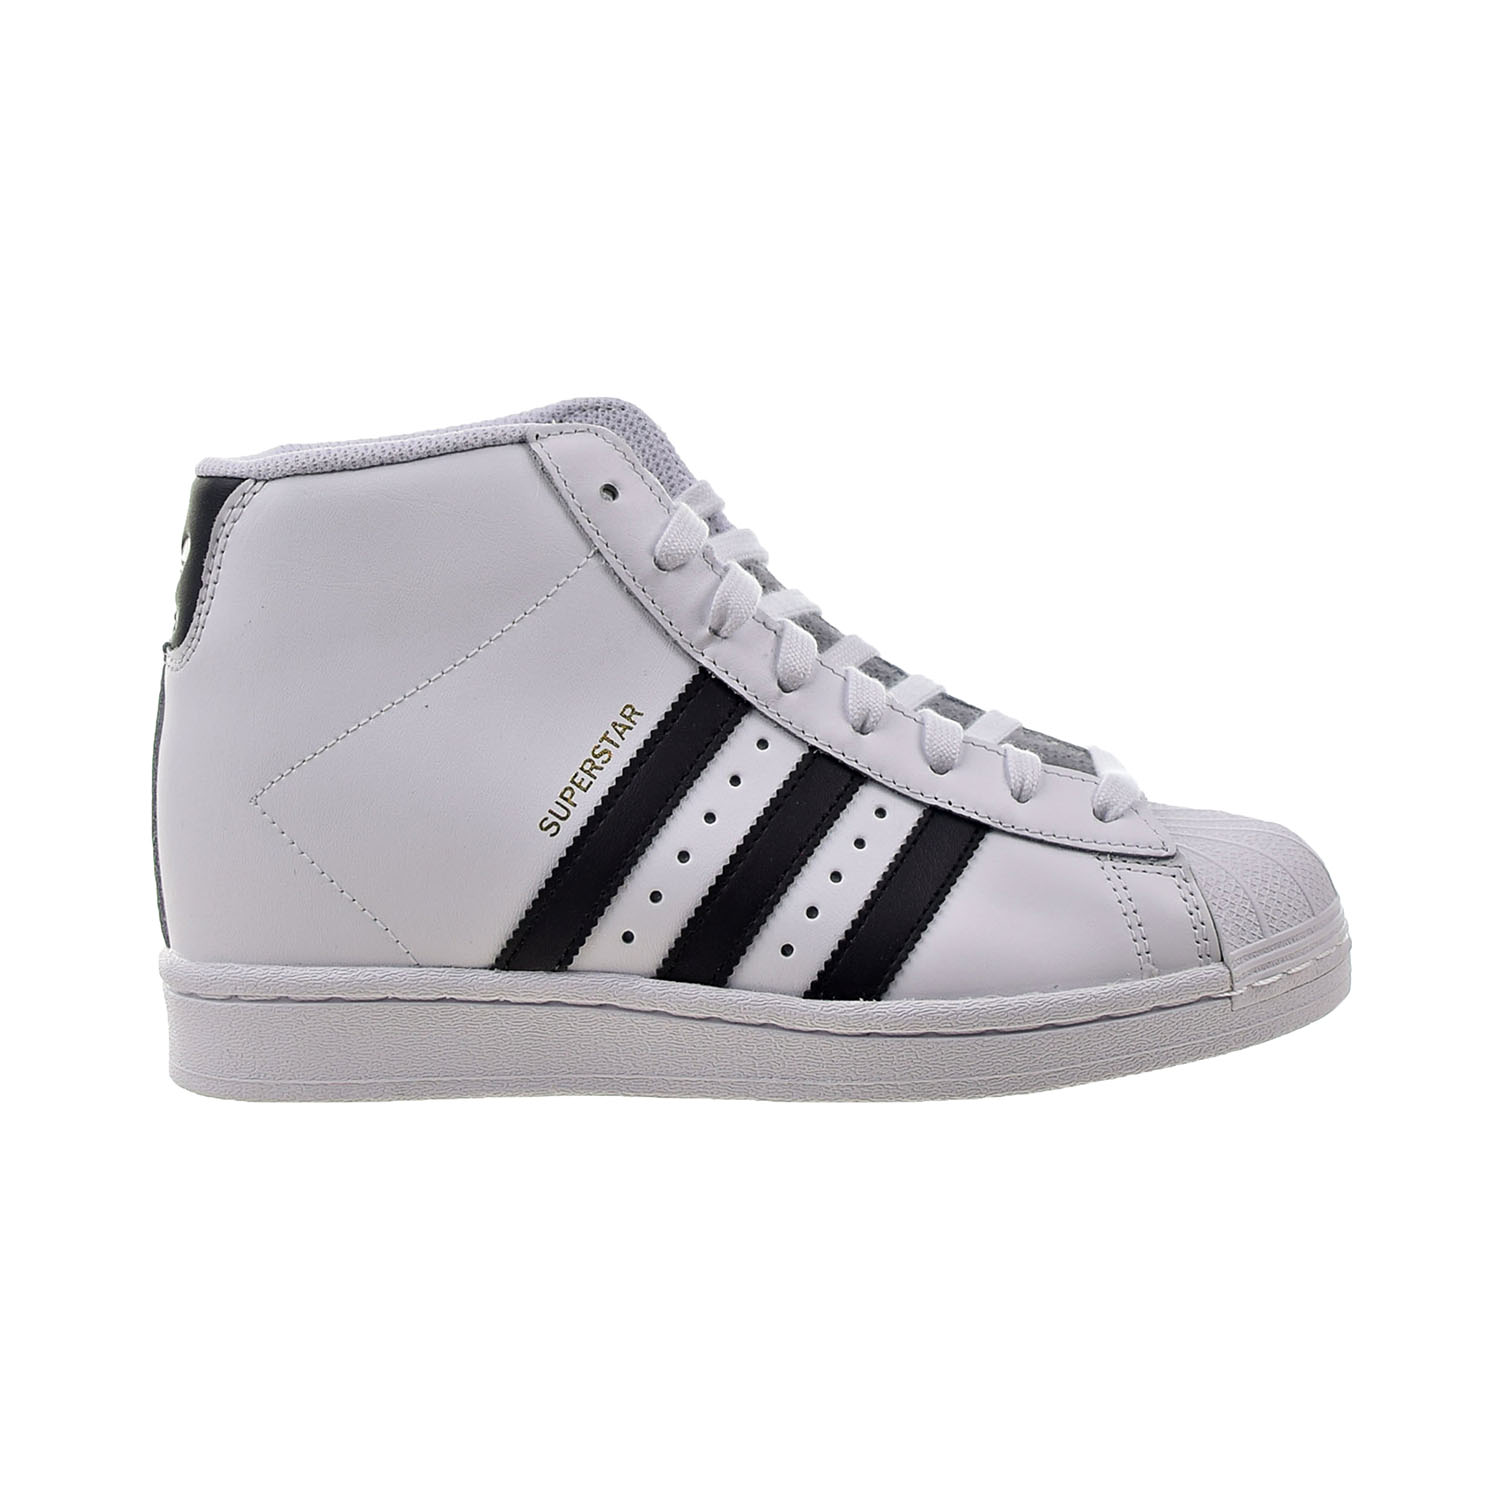 Adidas Superstar Up Wedge Women's Shoes Cloud White-Core Black fw0118